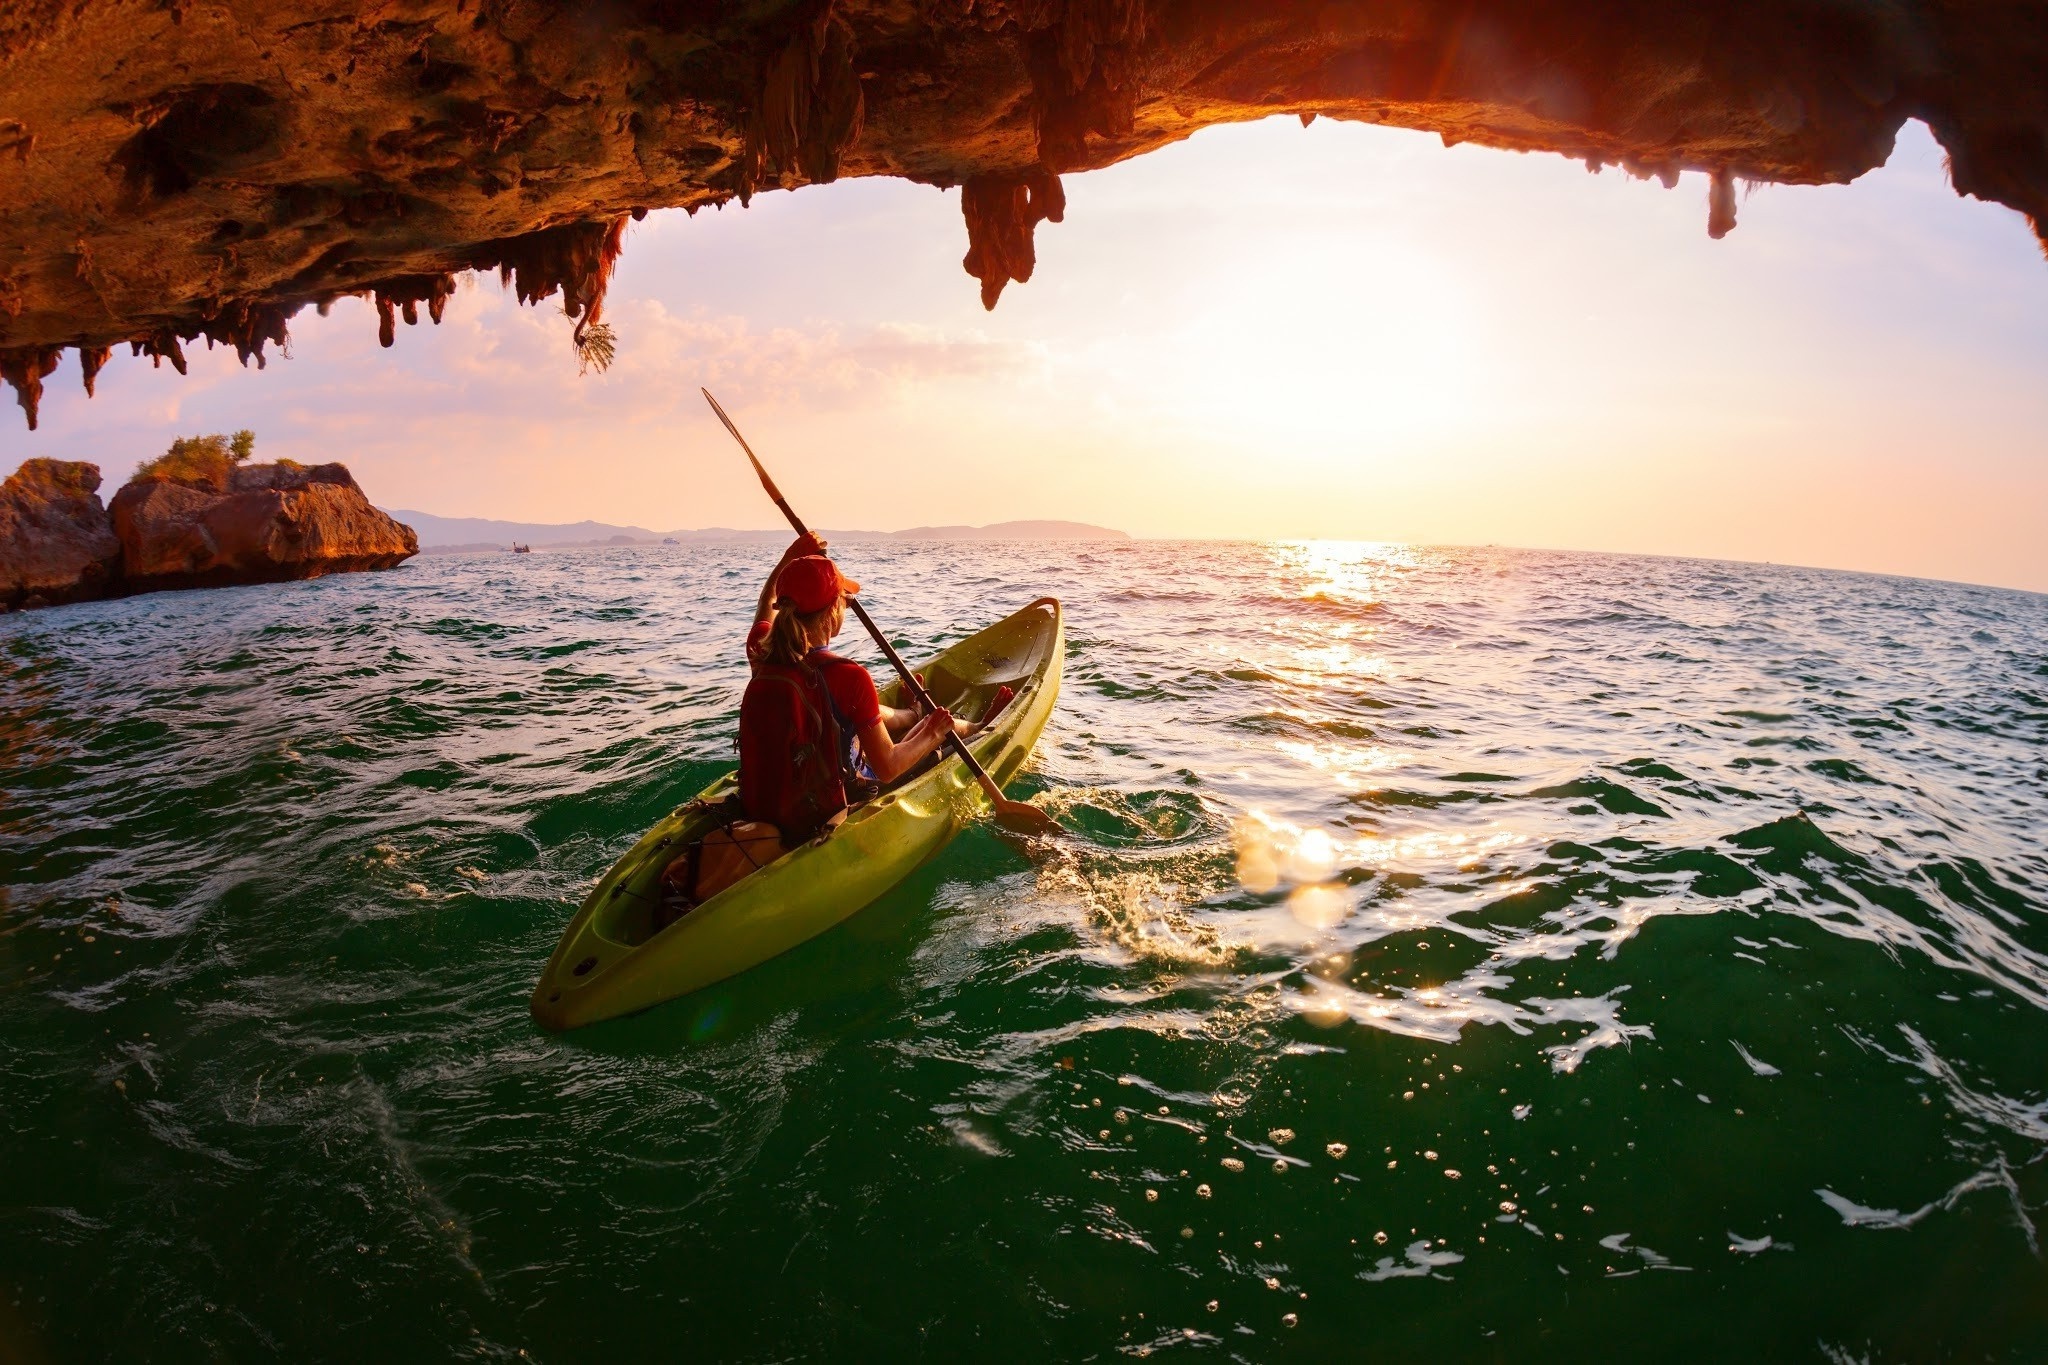 Kayaking: The girl uses a kayak to explore an ocean shore water cave, Outdoor activity and active sport. 2050x1370 HD Wallpaper.